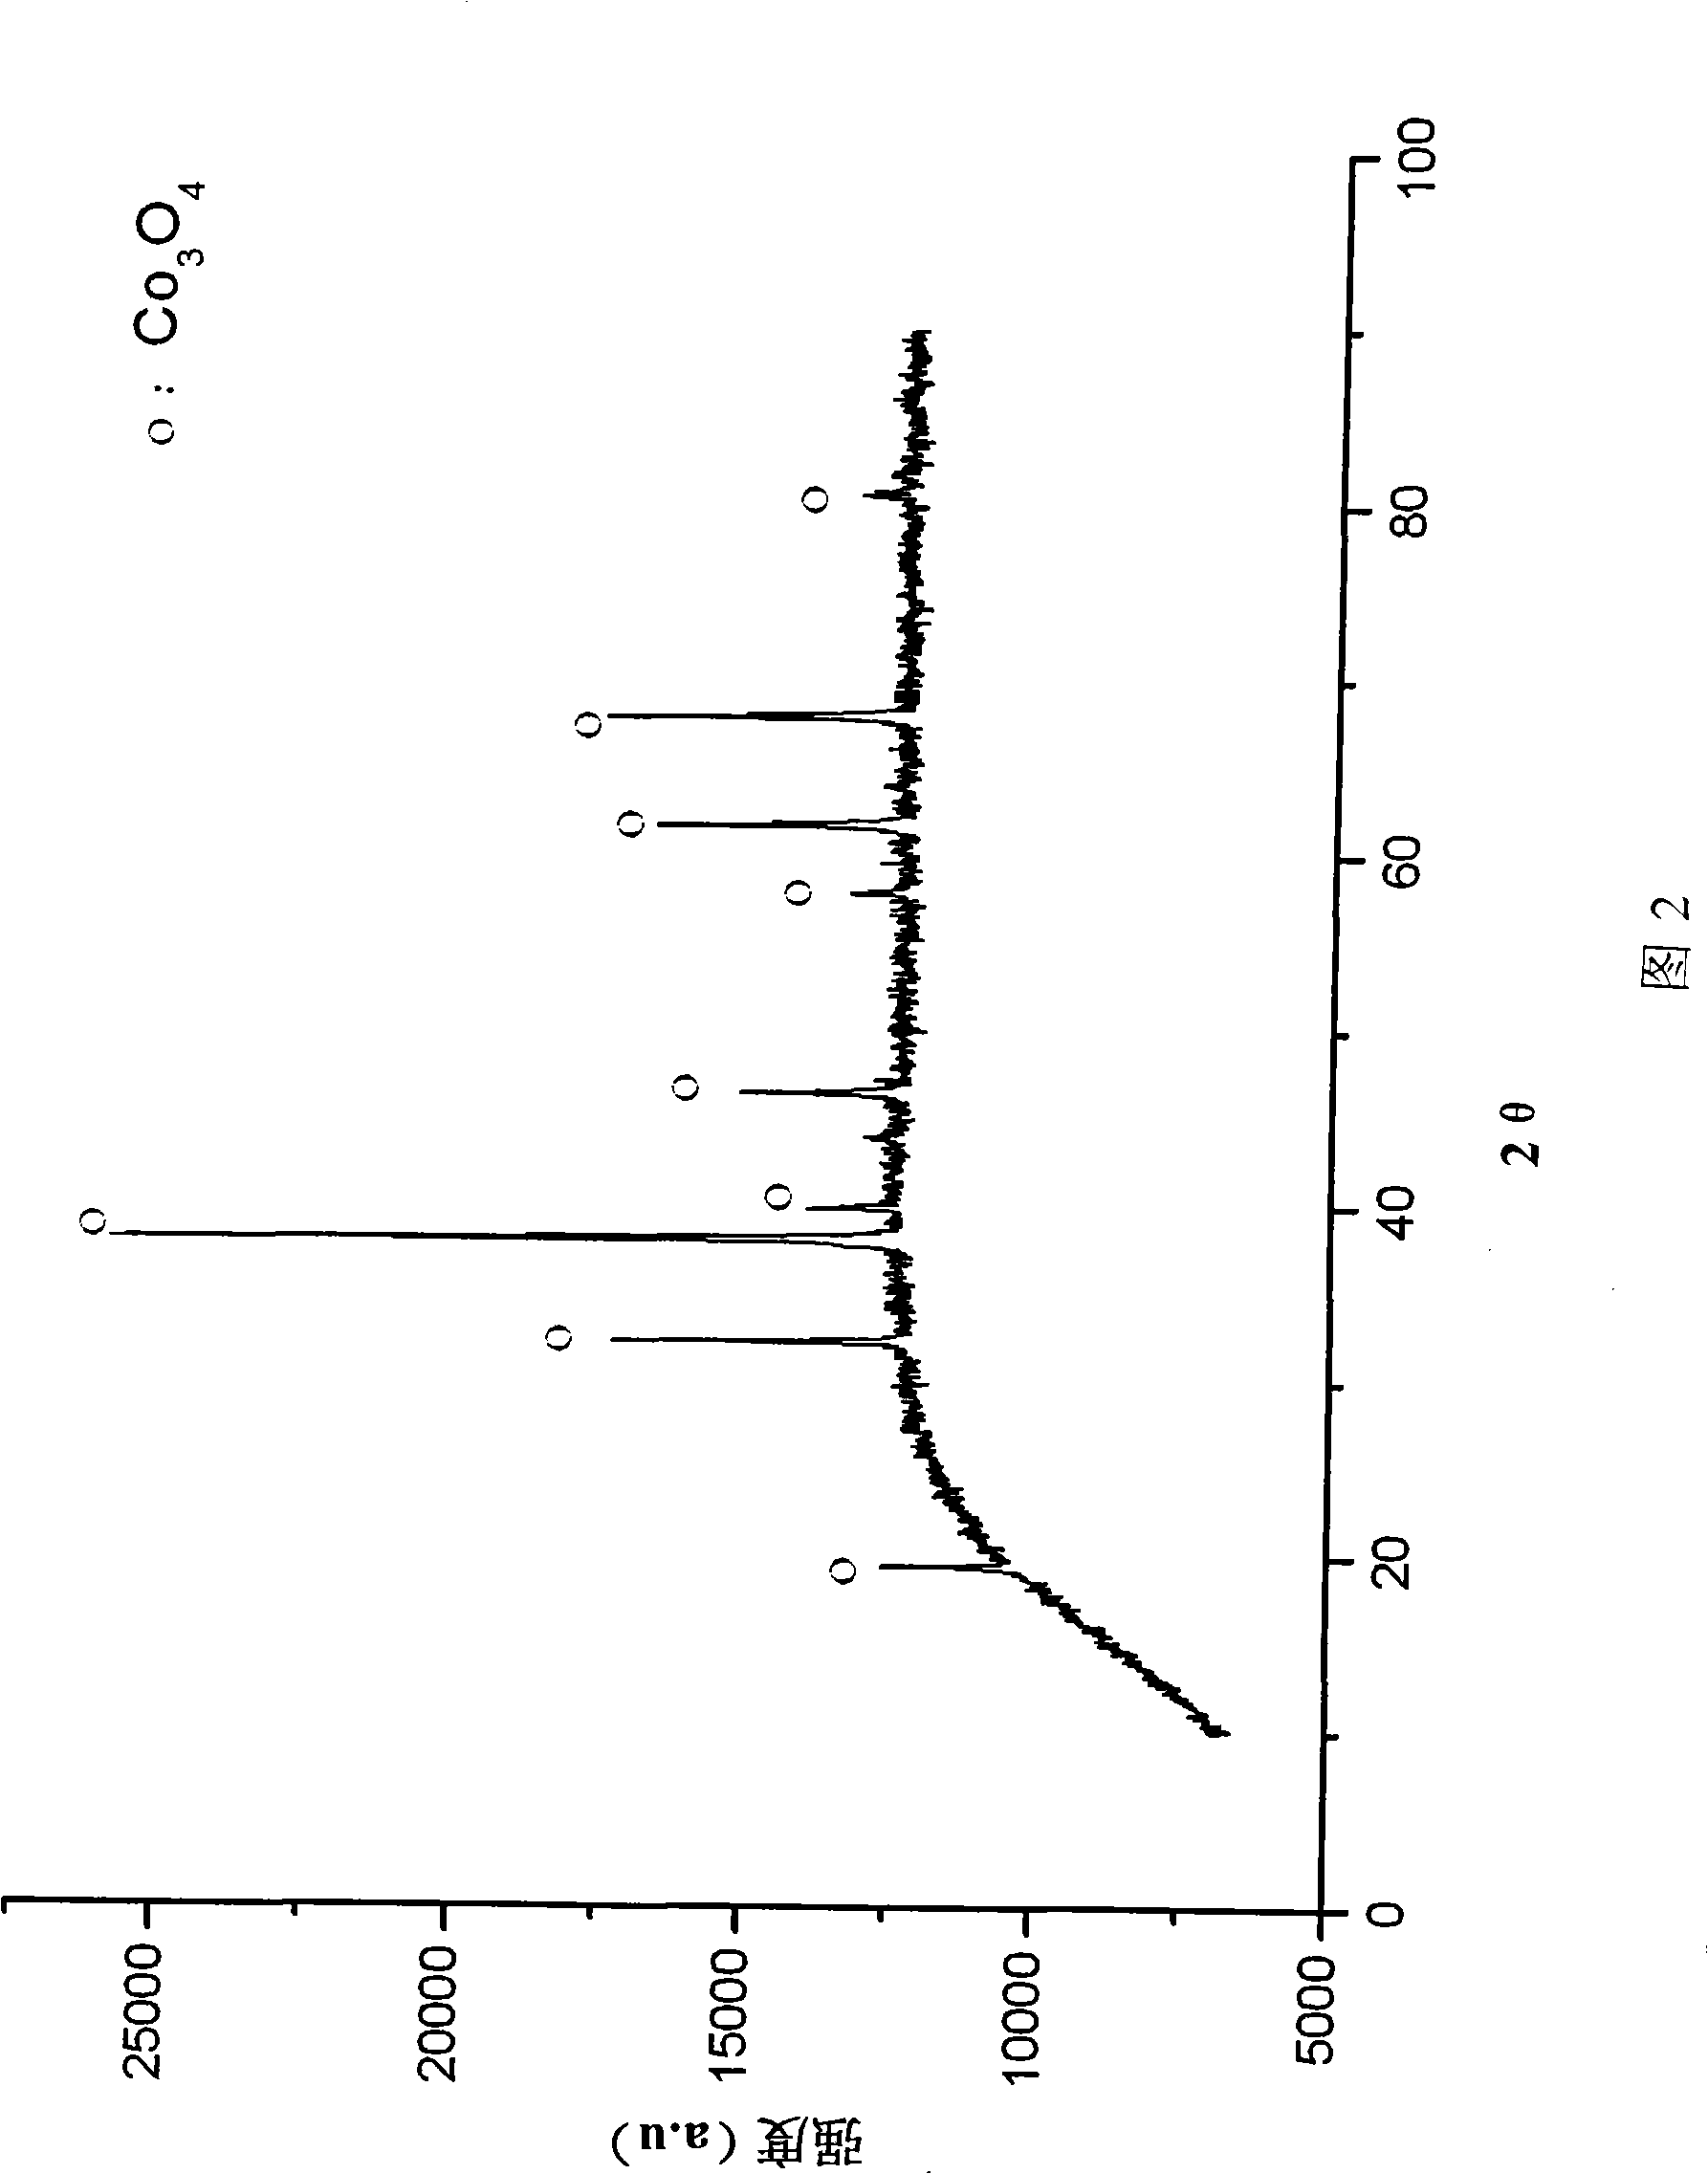 Method for preparing cobaltic-cobaltous oxide powder with octahedron shape